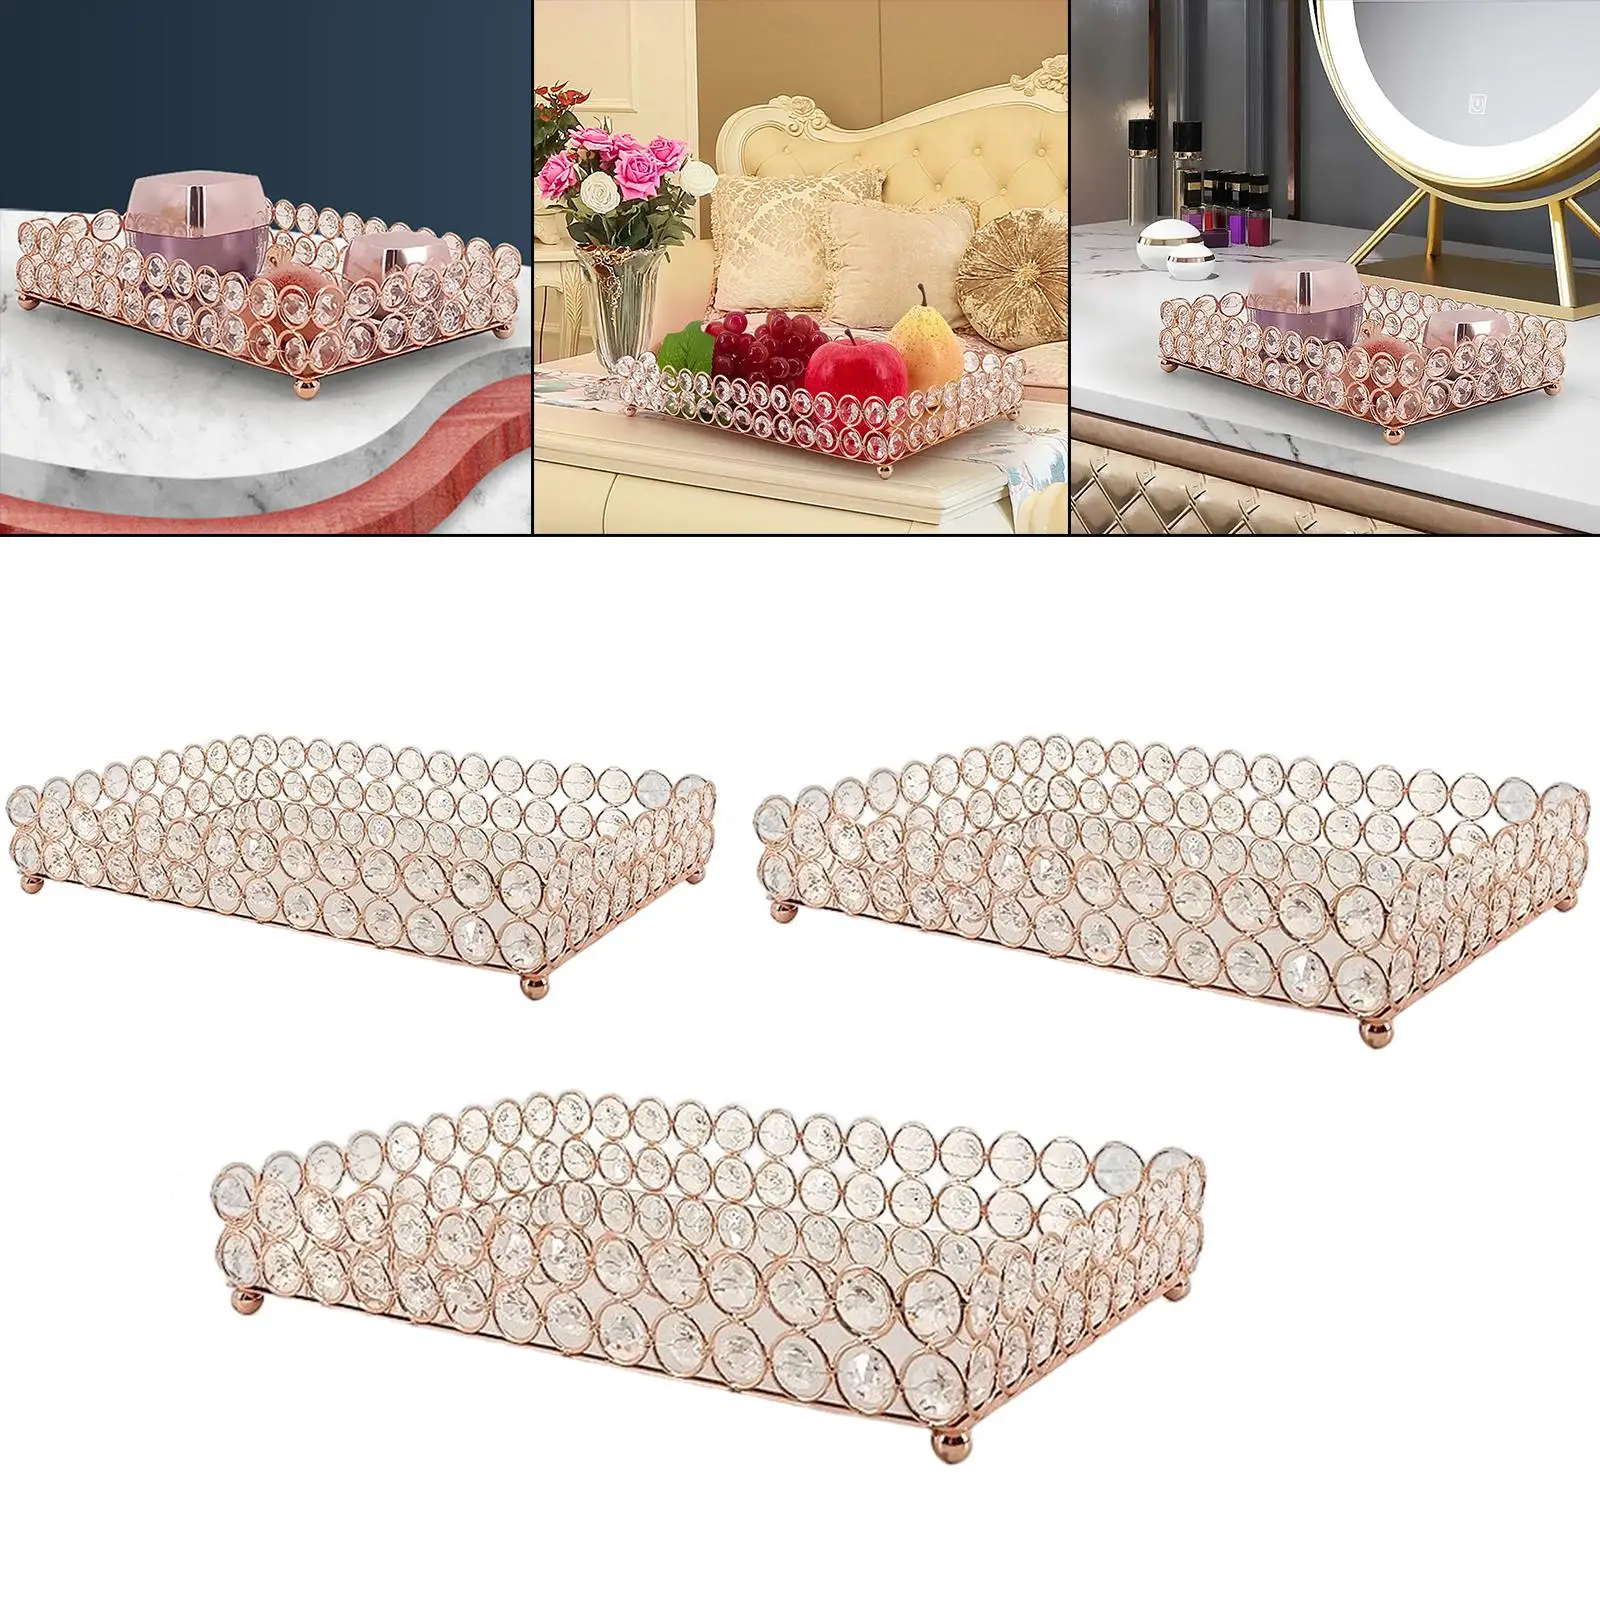 Decorative Mirrored Fruit Tray Panel Desktop Classic Cosmetic Container Display Panel for Wedding Wine Keepsakes Necklace Snacks